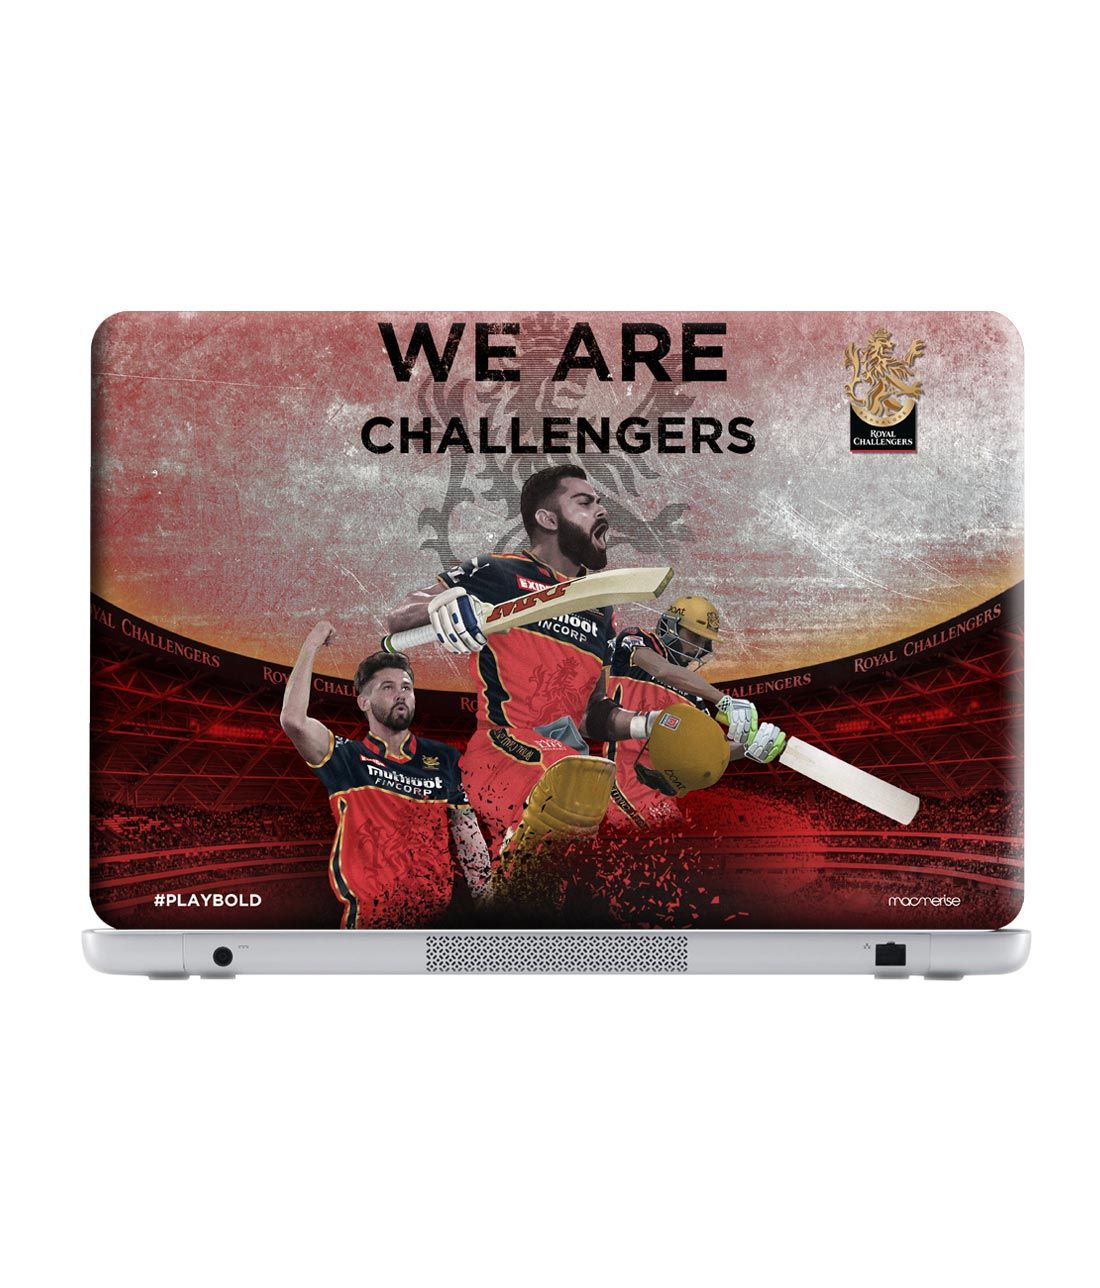 

Redwolf - RCB Fighters - Royal Challengers Bangalore Official Laptop Skin-macbook-air-13"-(2012-2017), Black